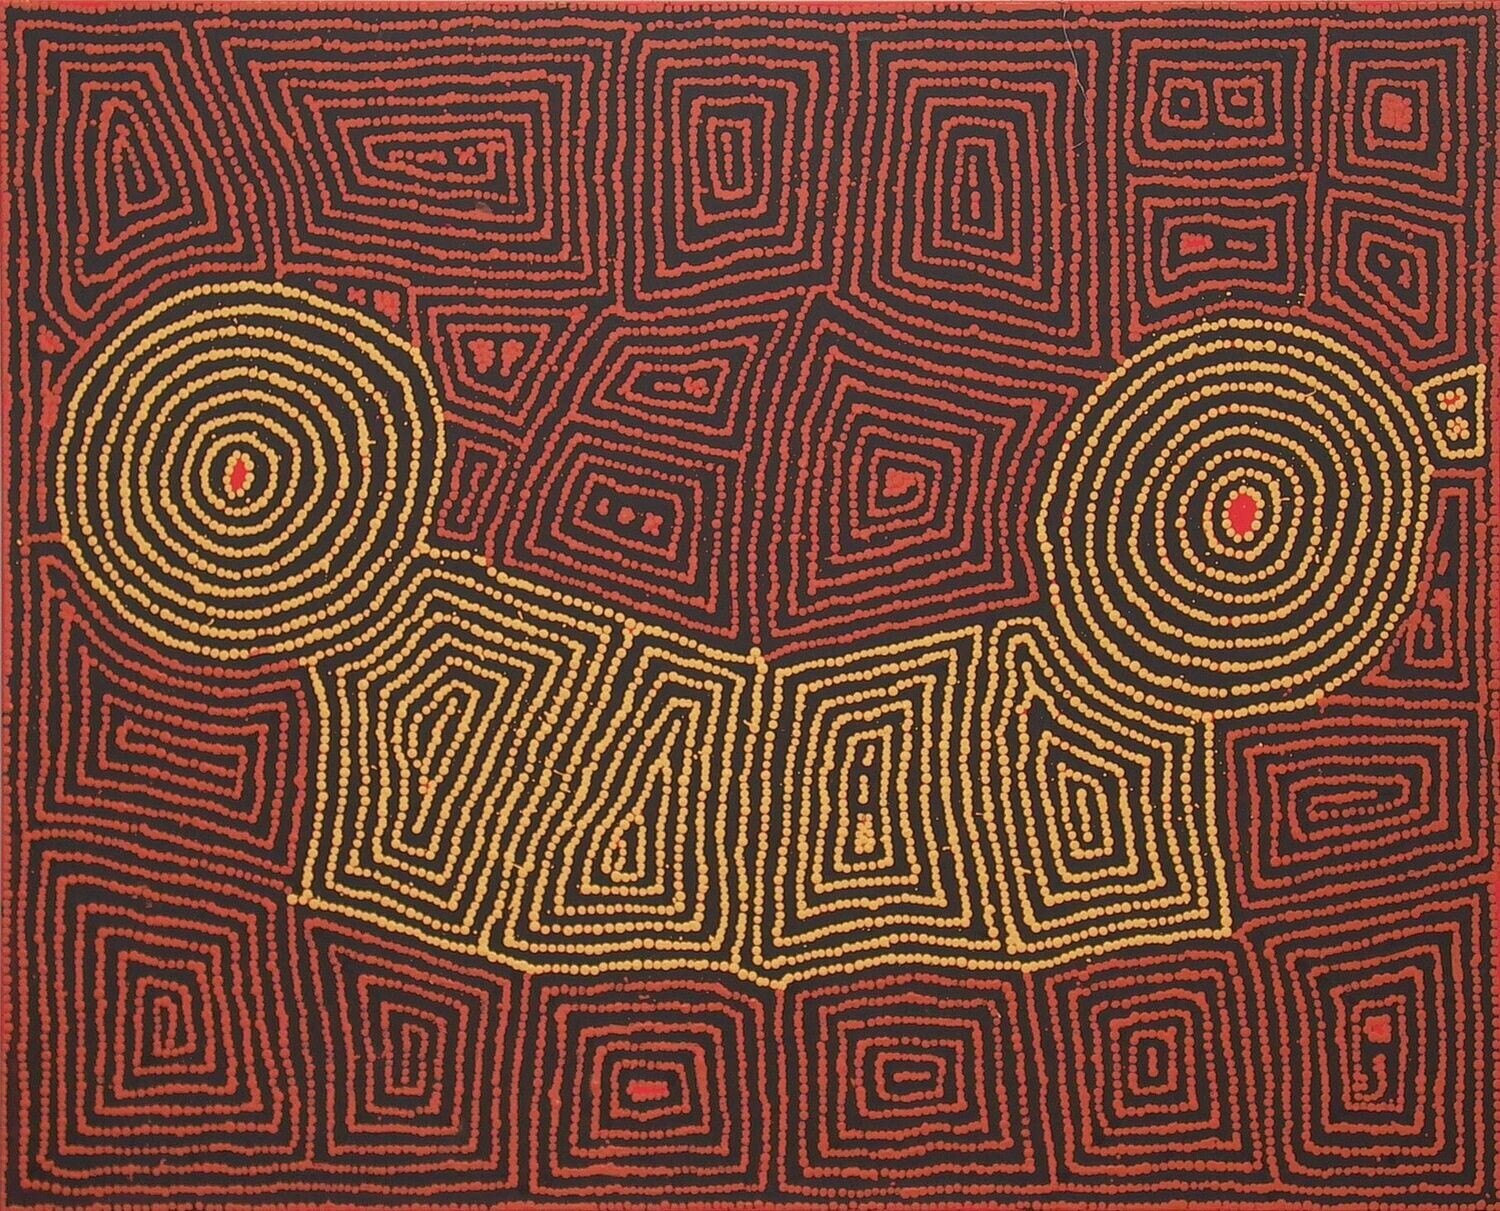 Tingari Cycle 2005 by Barney Campbell Tjakamarra
122x152cm Cat 9372BC